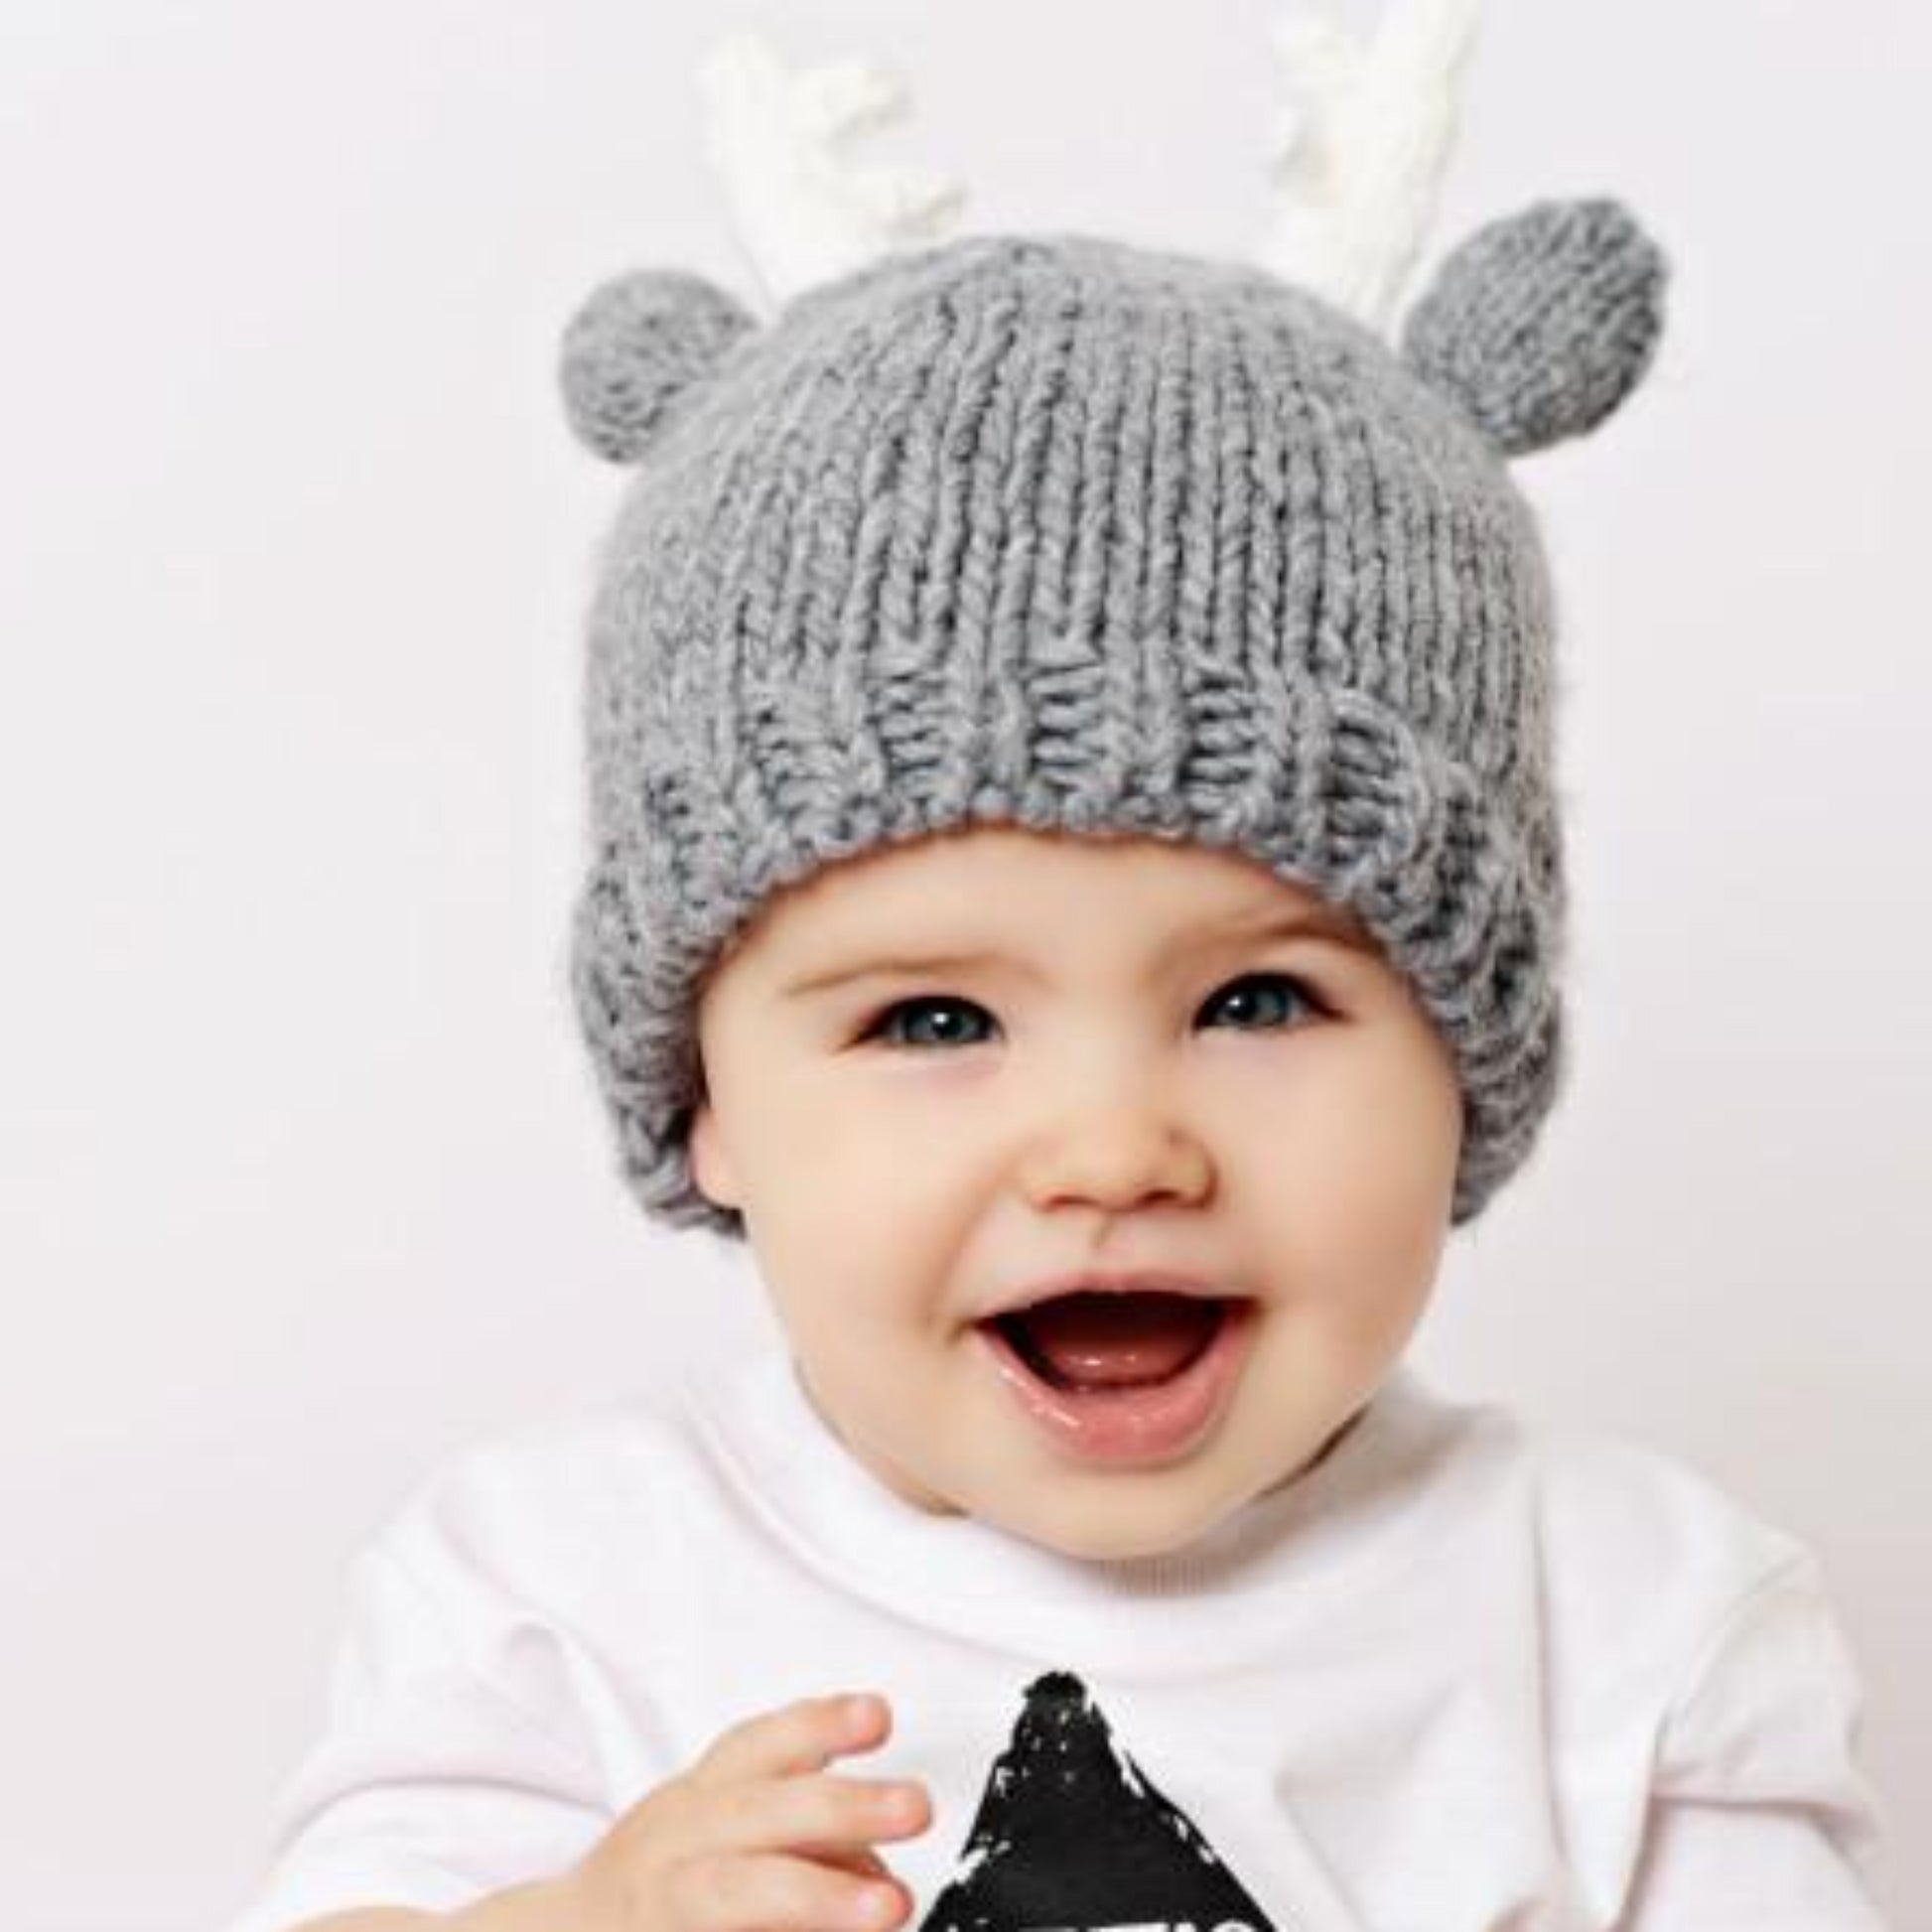 hand knit gray deer with white ears and white antlers for baby toddler infant child christmas winter holiday